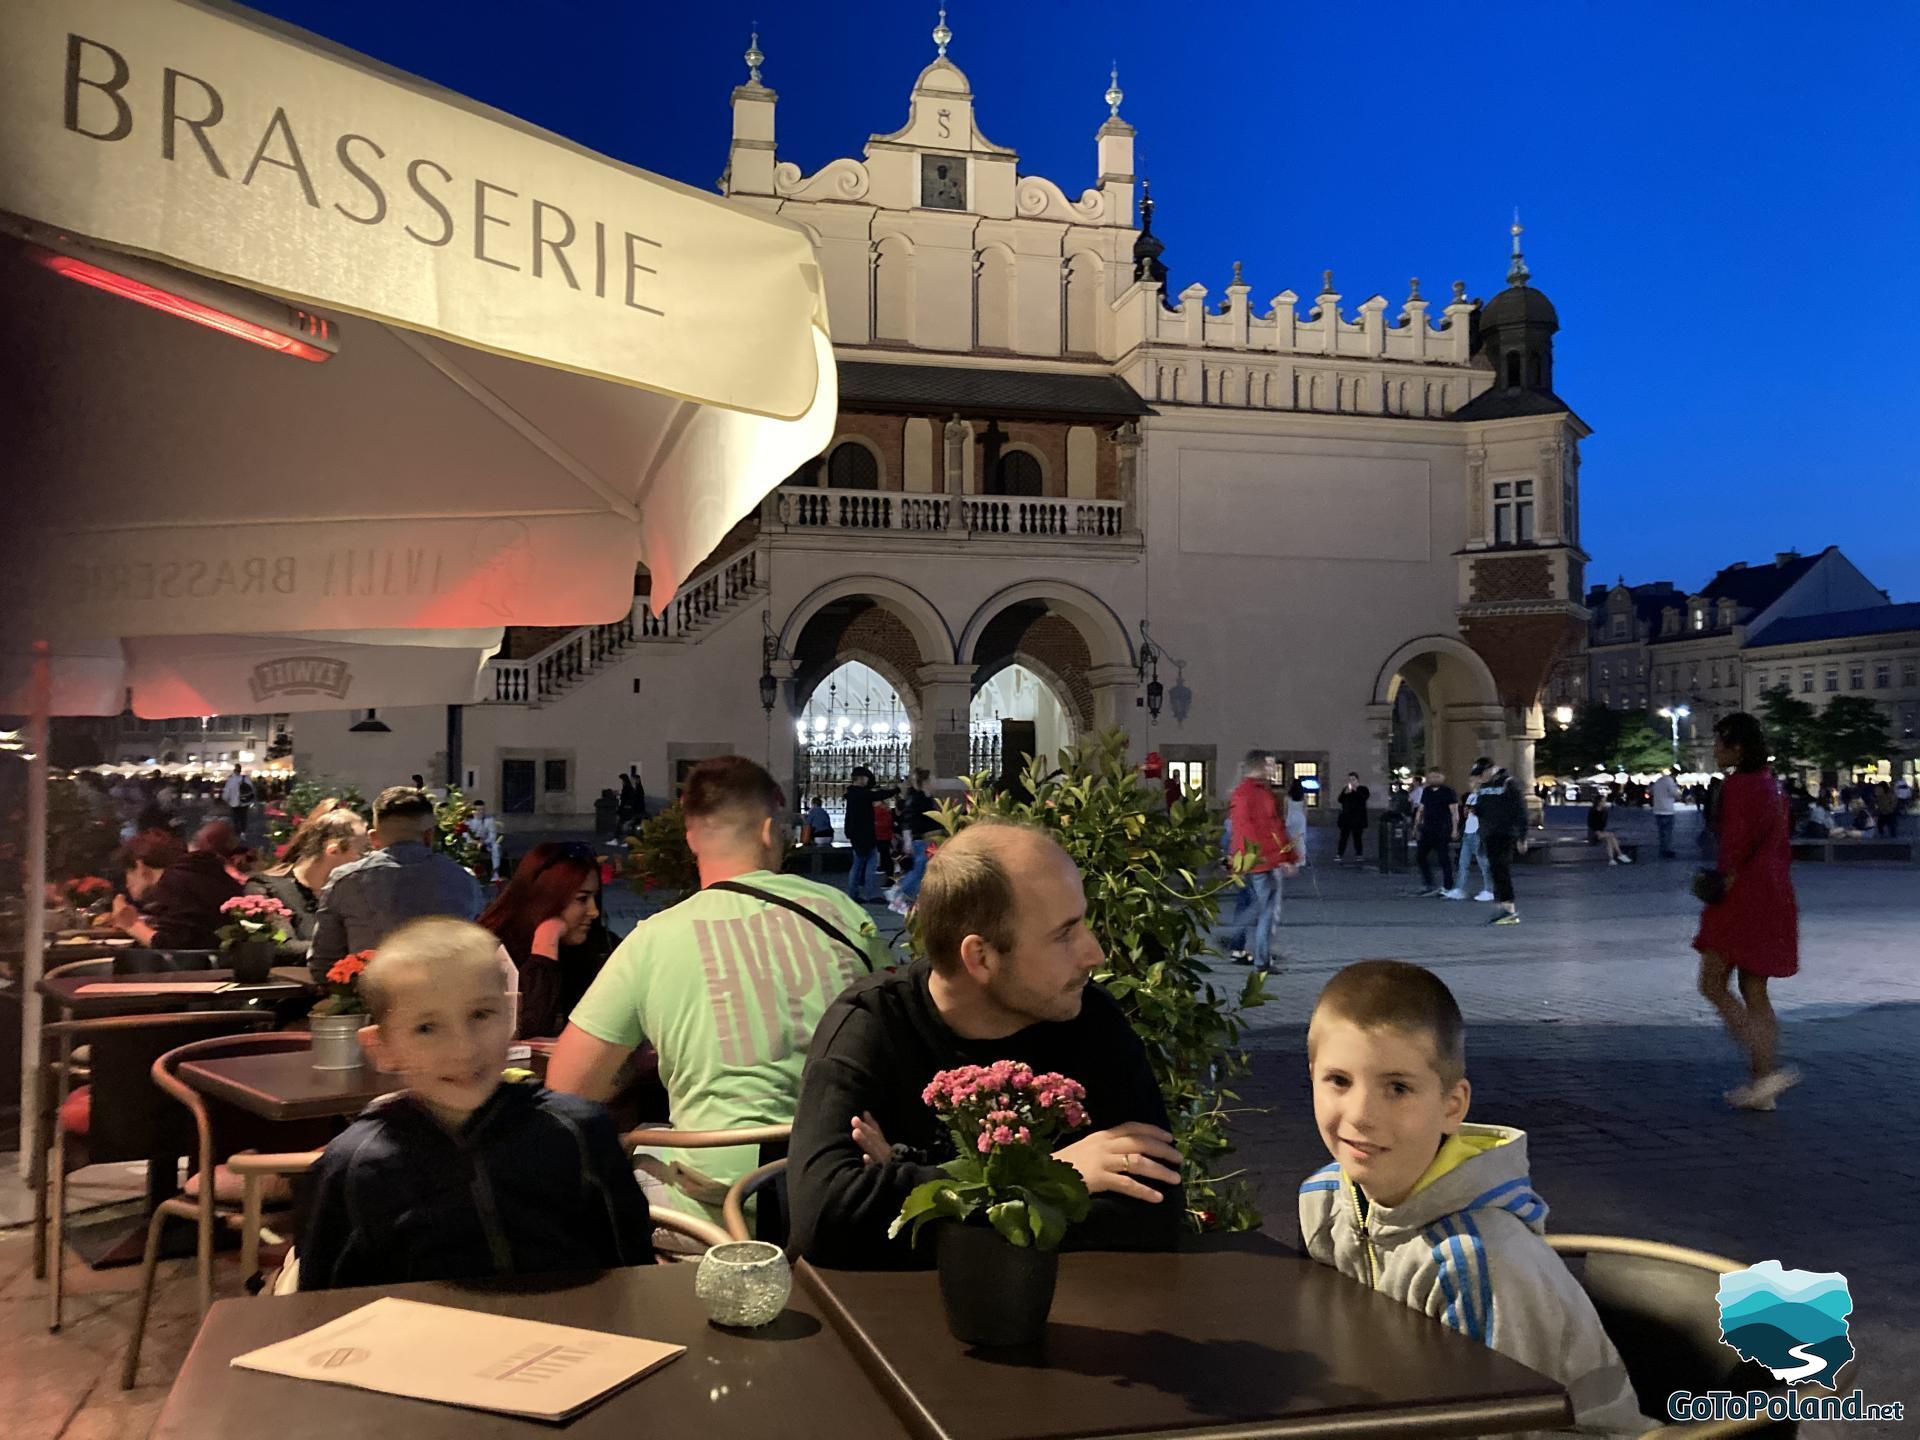 its evening, the family is sitting at a table in an open-air restaurant, the Cloth Hall behind them